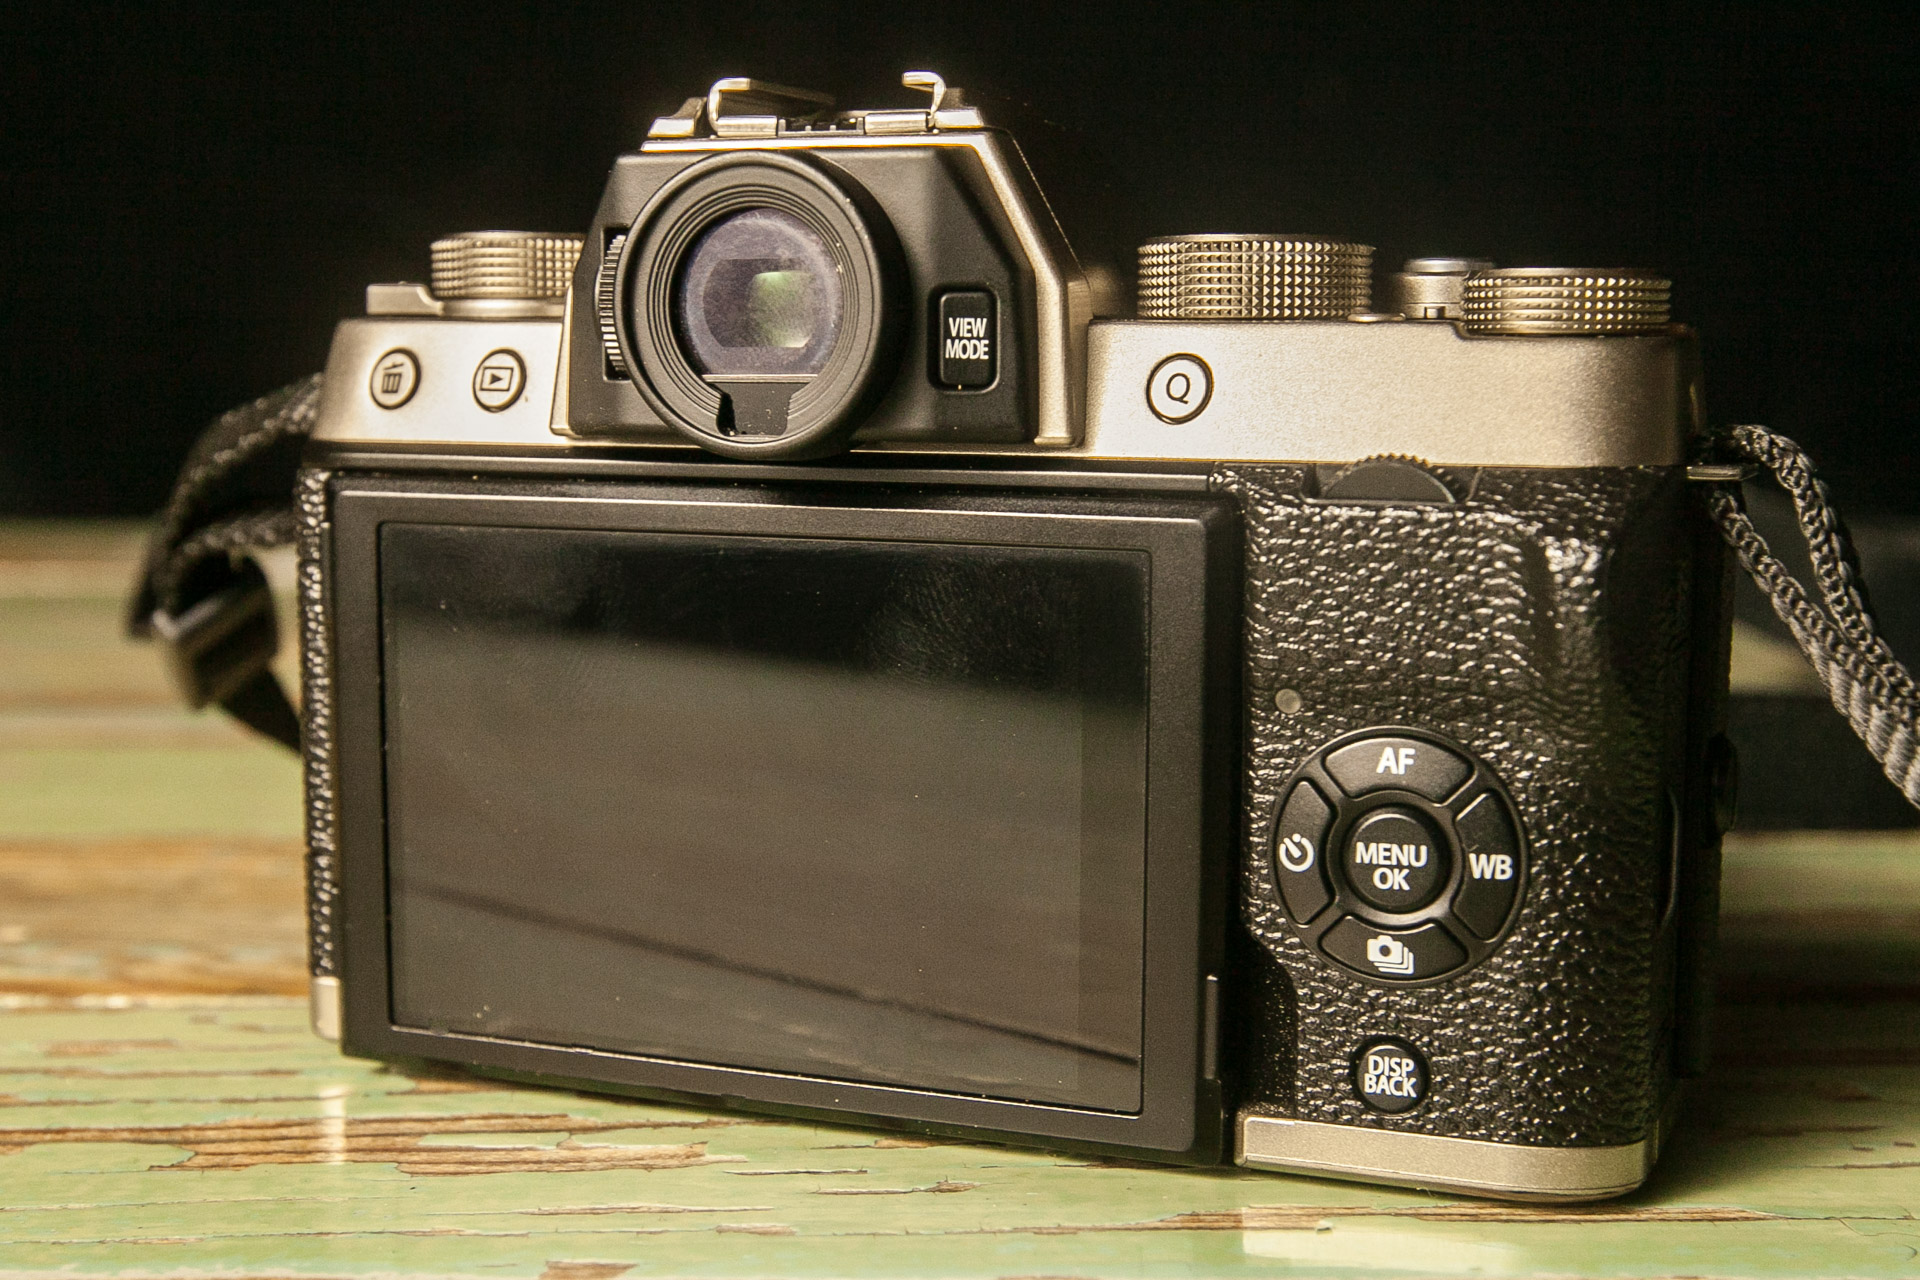 Image showing the back of the Fujifilm X-T100